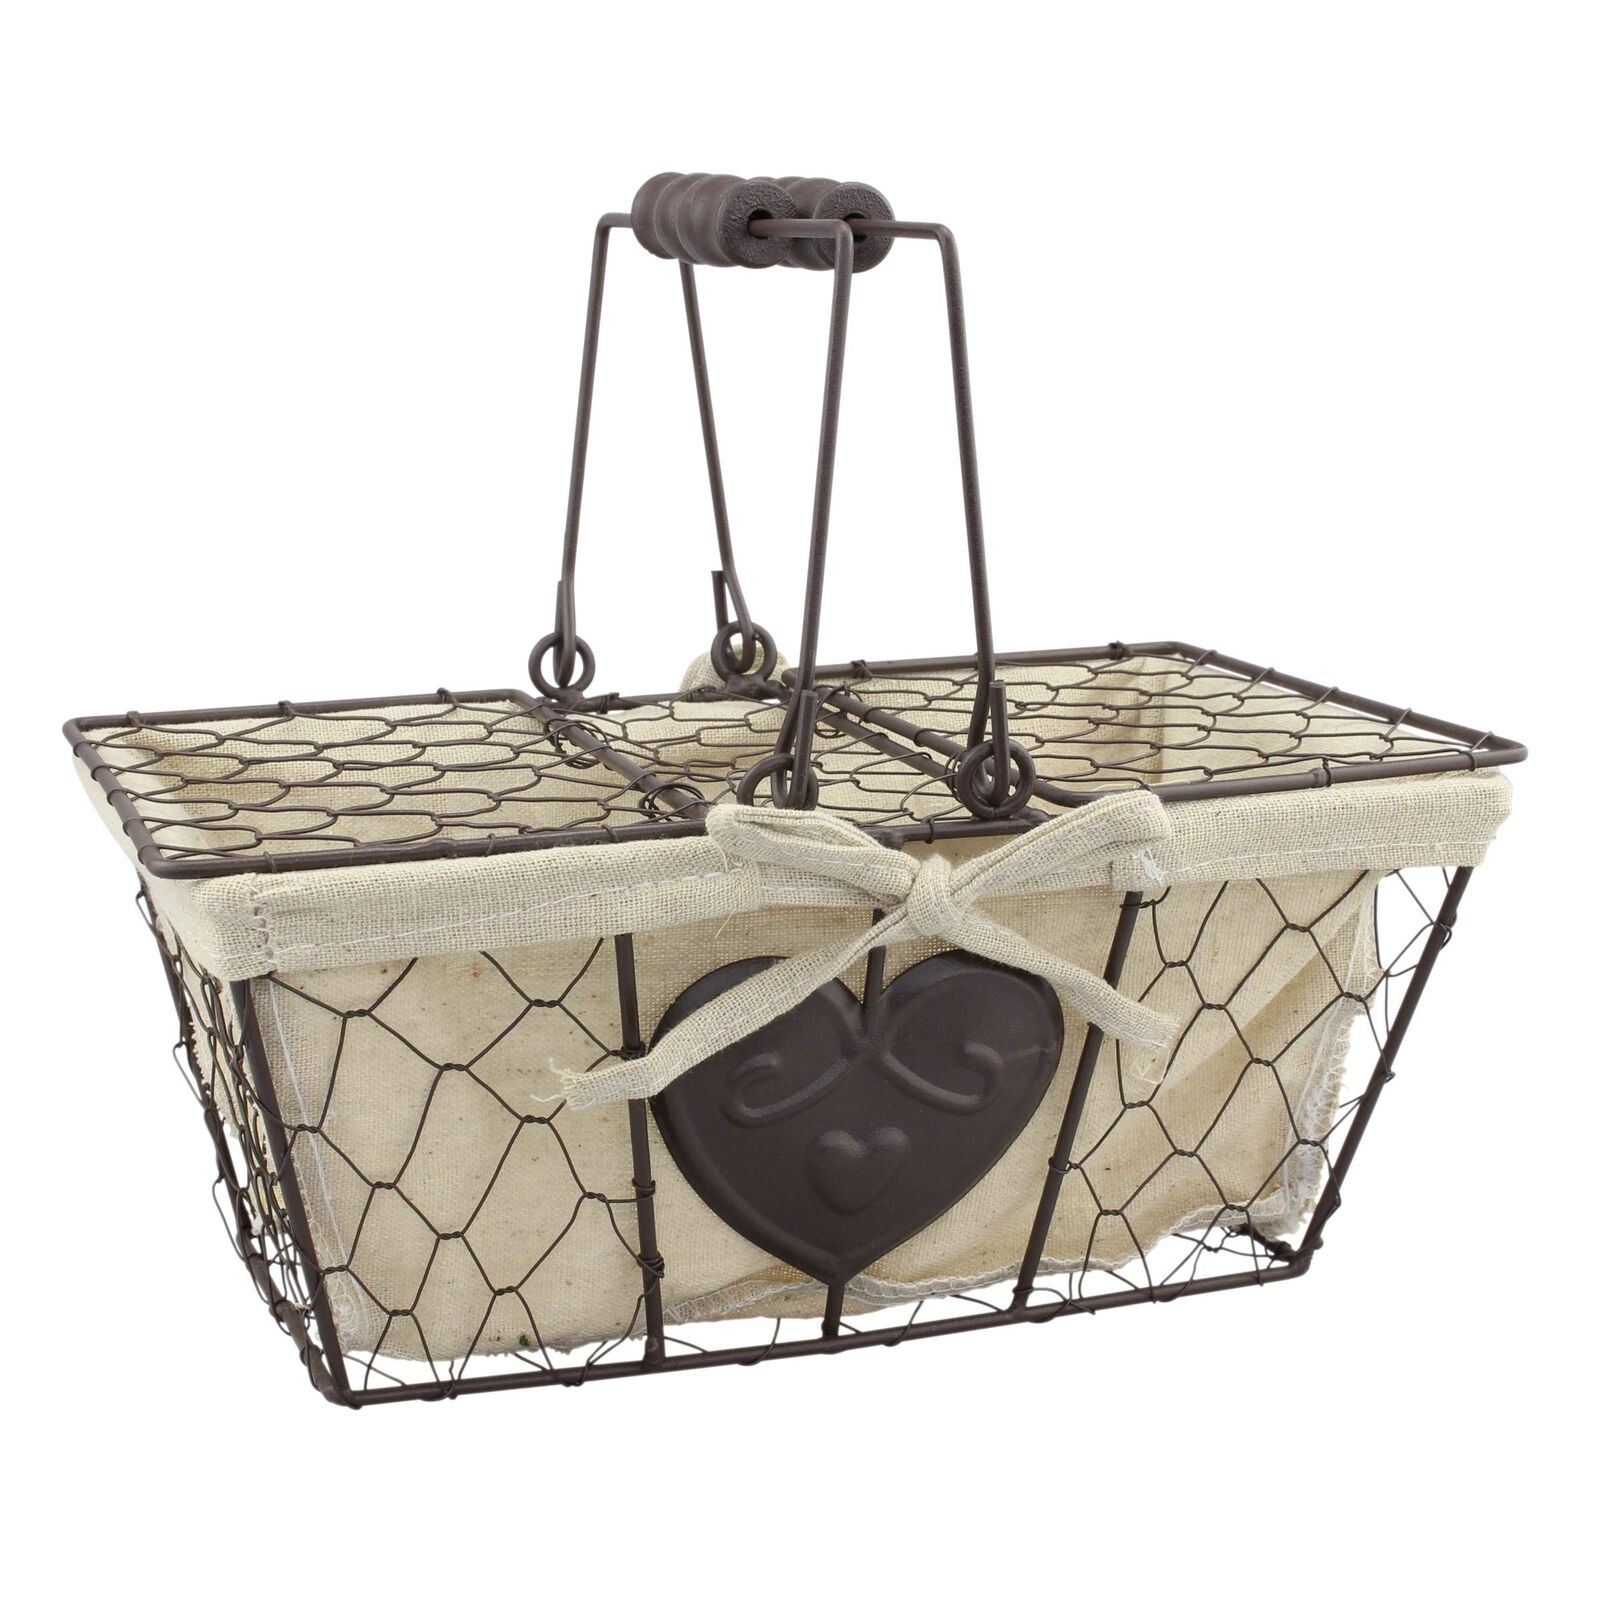 Stonebriar Farmhouse Metal Chicken Wire Picnic Basket with Hinged Lids, Handl...